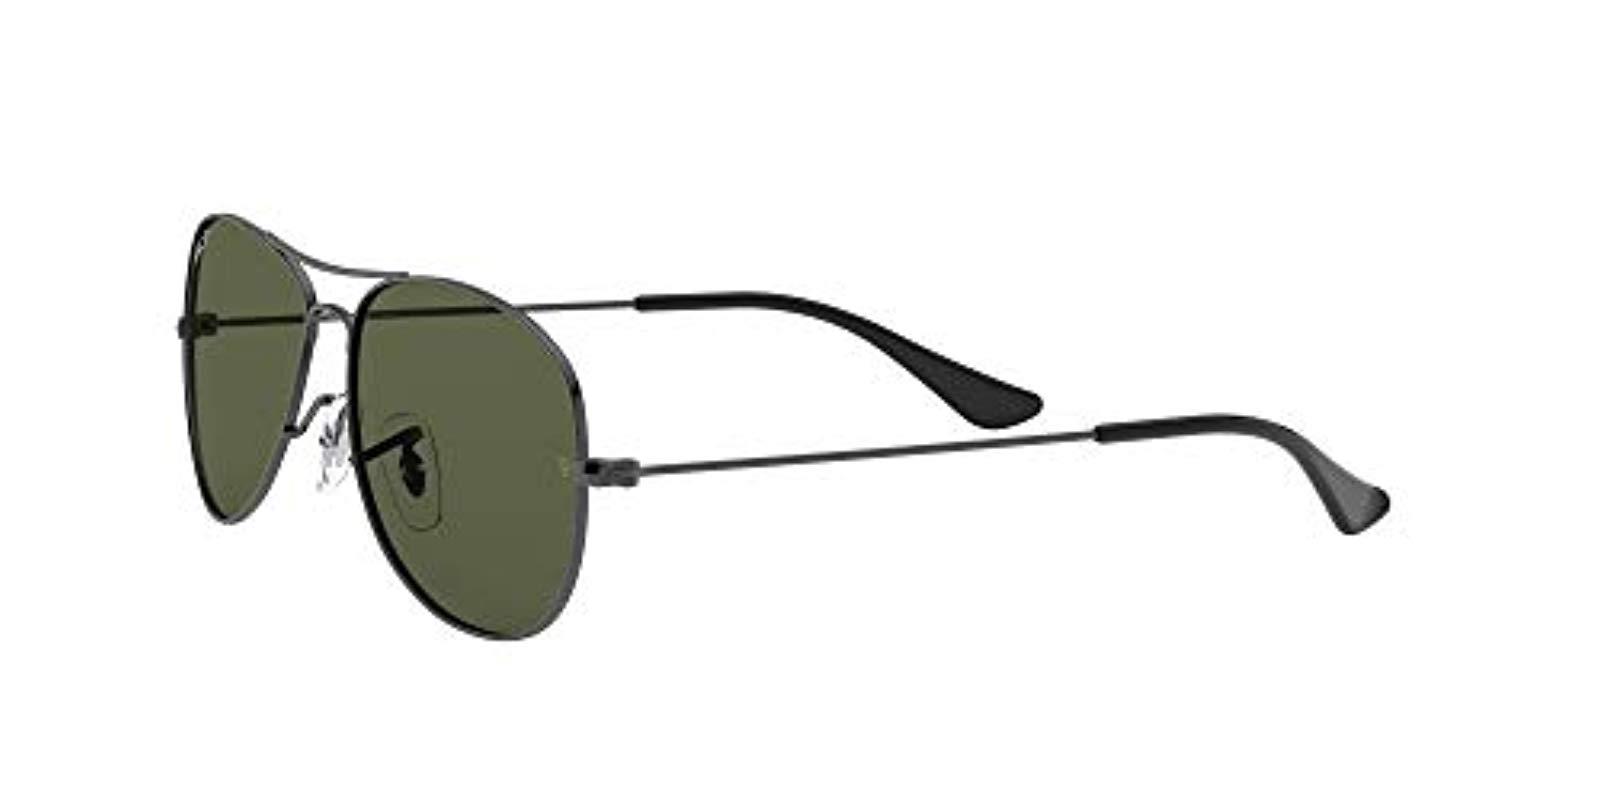 Ray-Ban Rb3362 Cockpit Aviator Sunglasses in Gold/Green (Green) - Save 71%  - Lyst